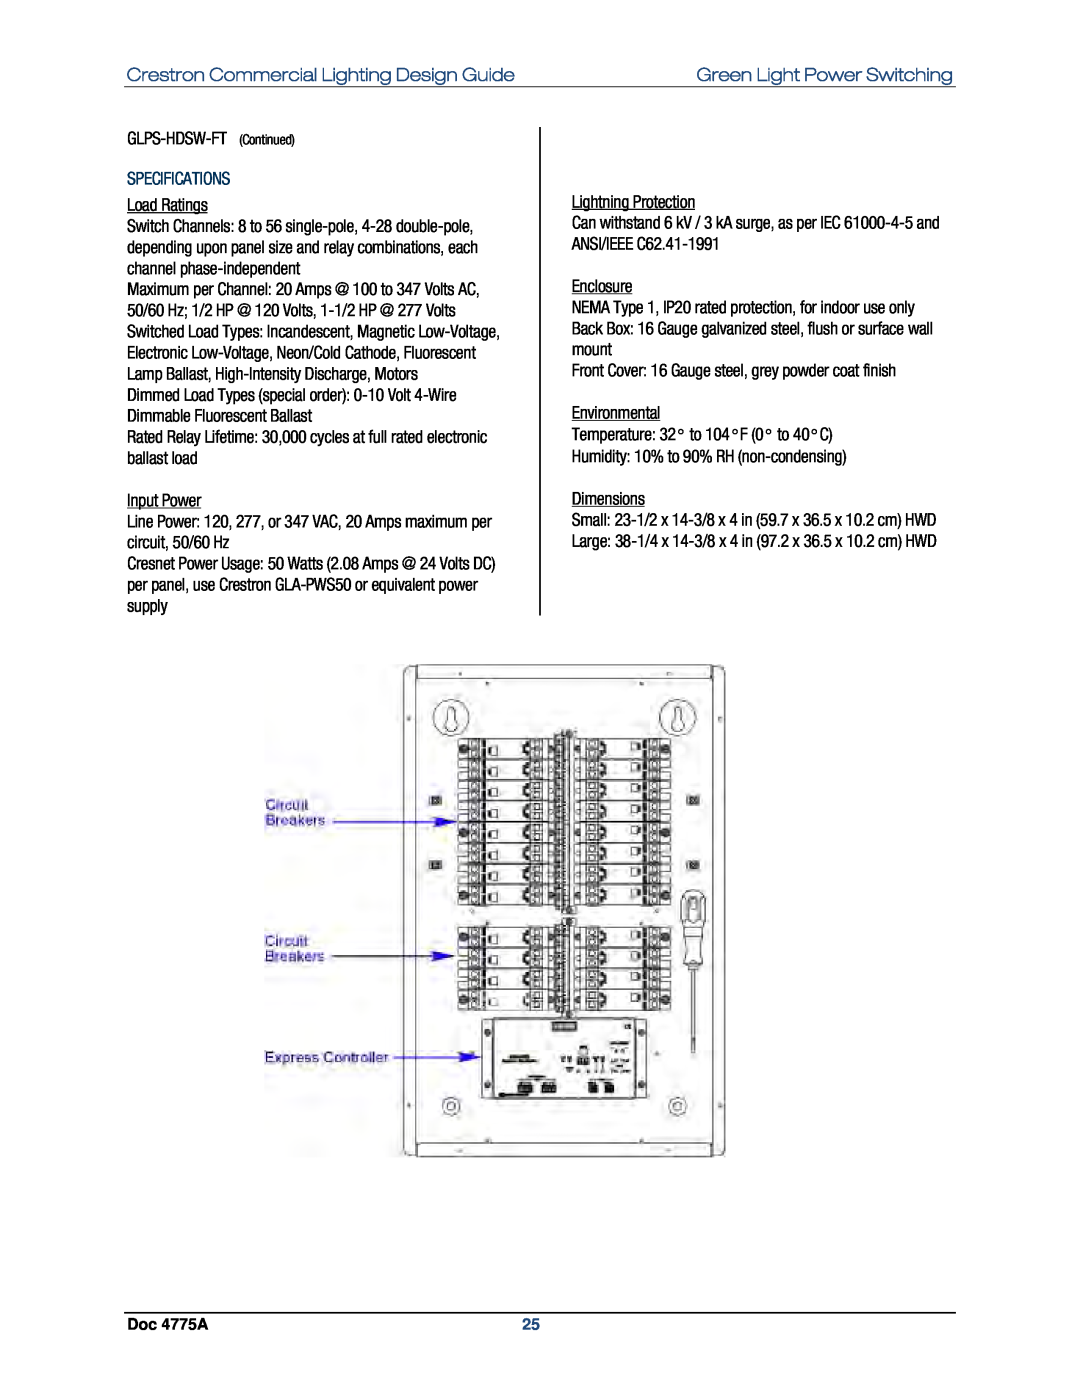 Crestron electronic GLPS-HSW-FT, IPAC-GL1, GLPS-SW Crestron Commercial Lighting Design Guide, Green Light Power Switching 